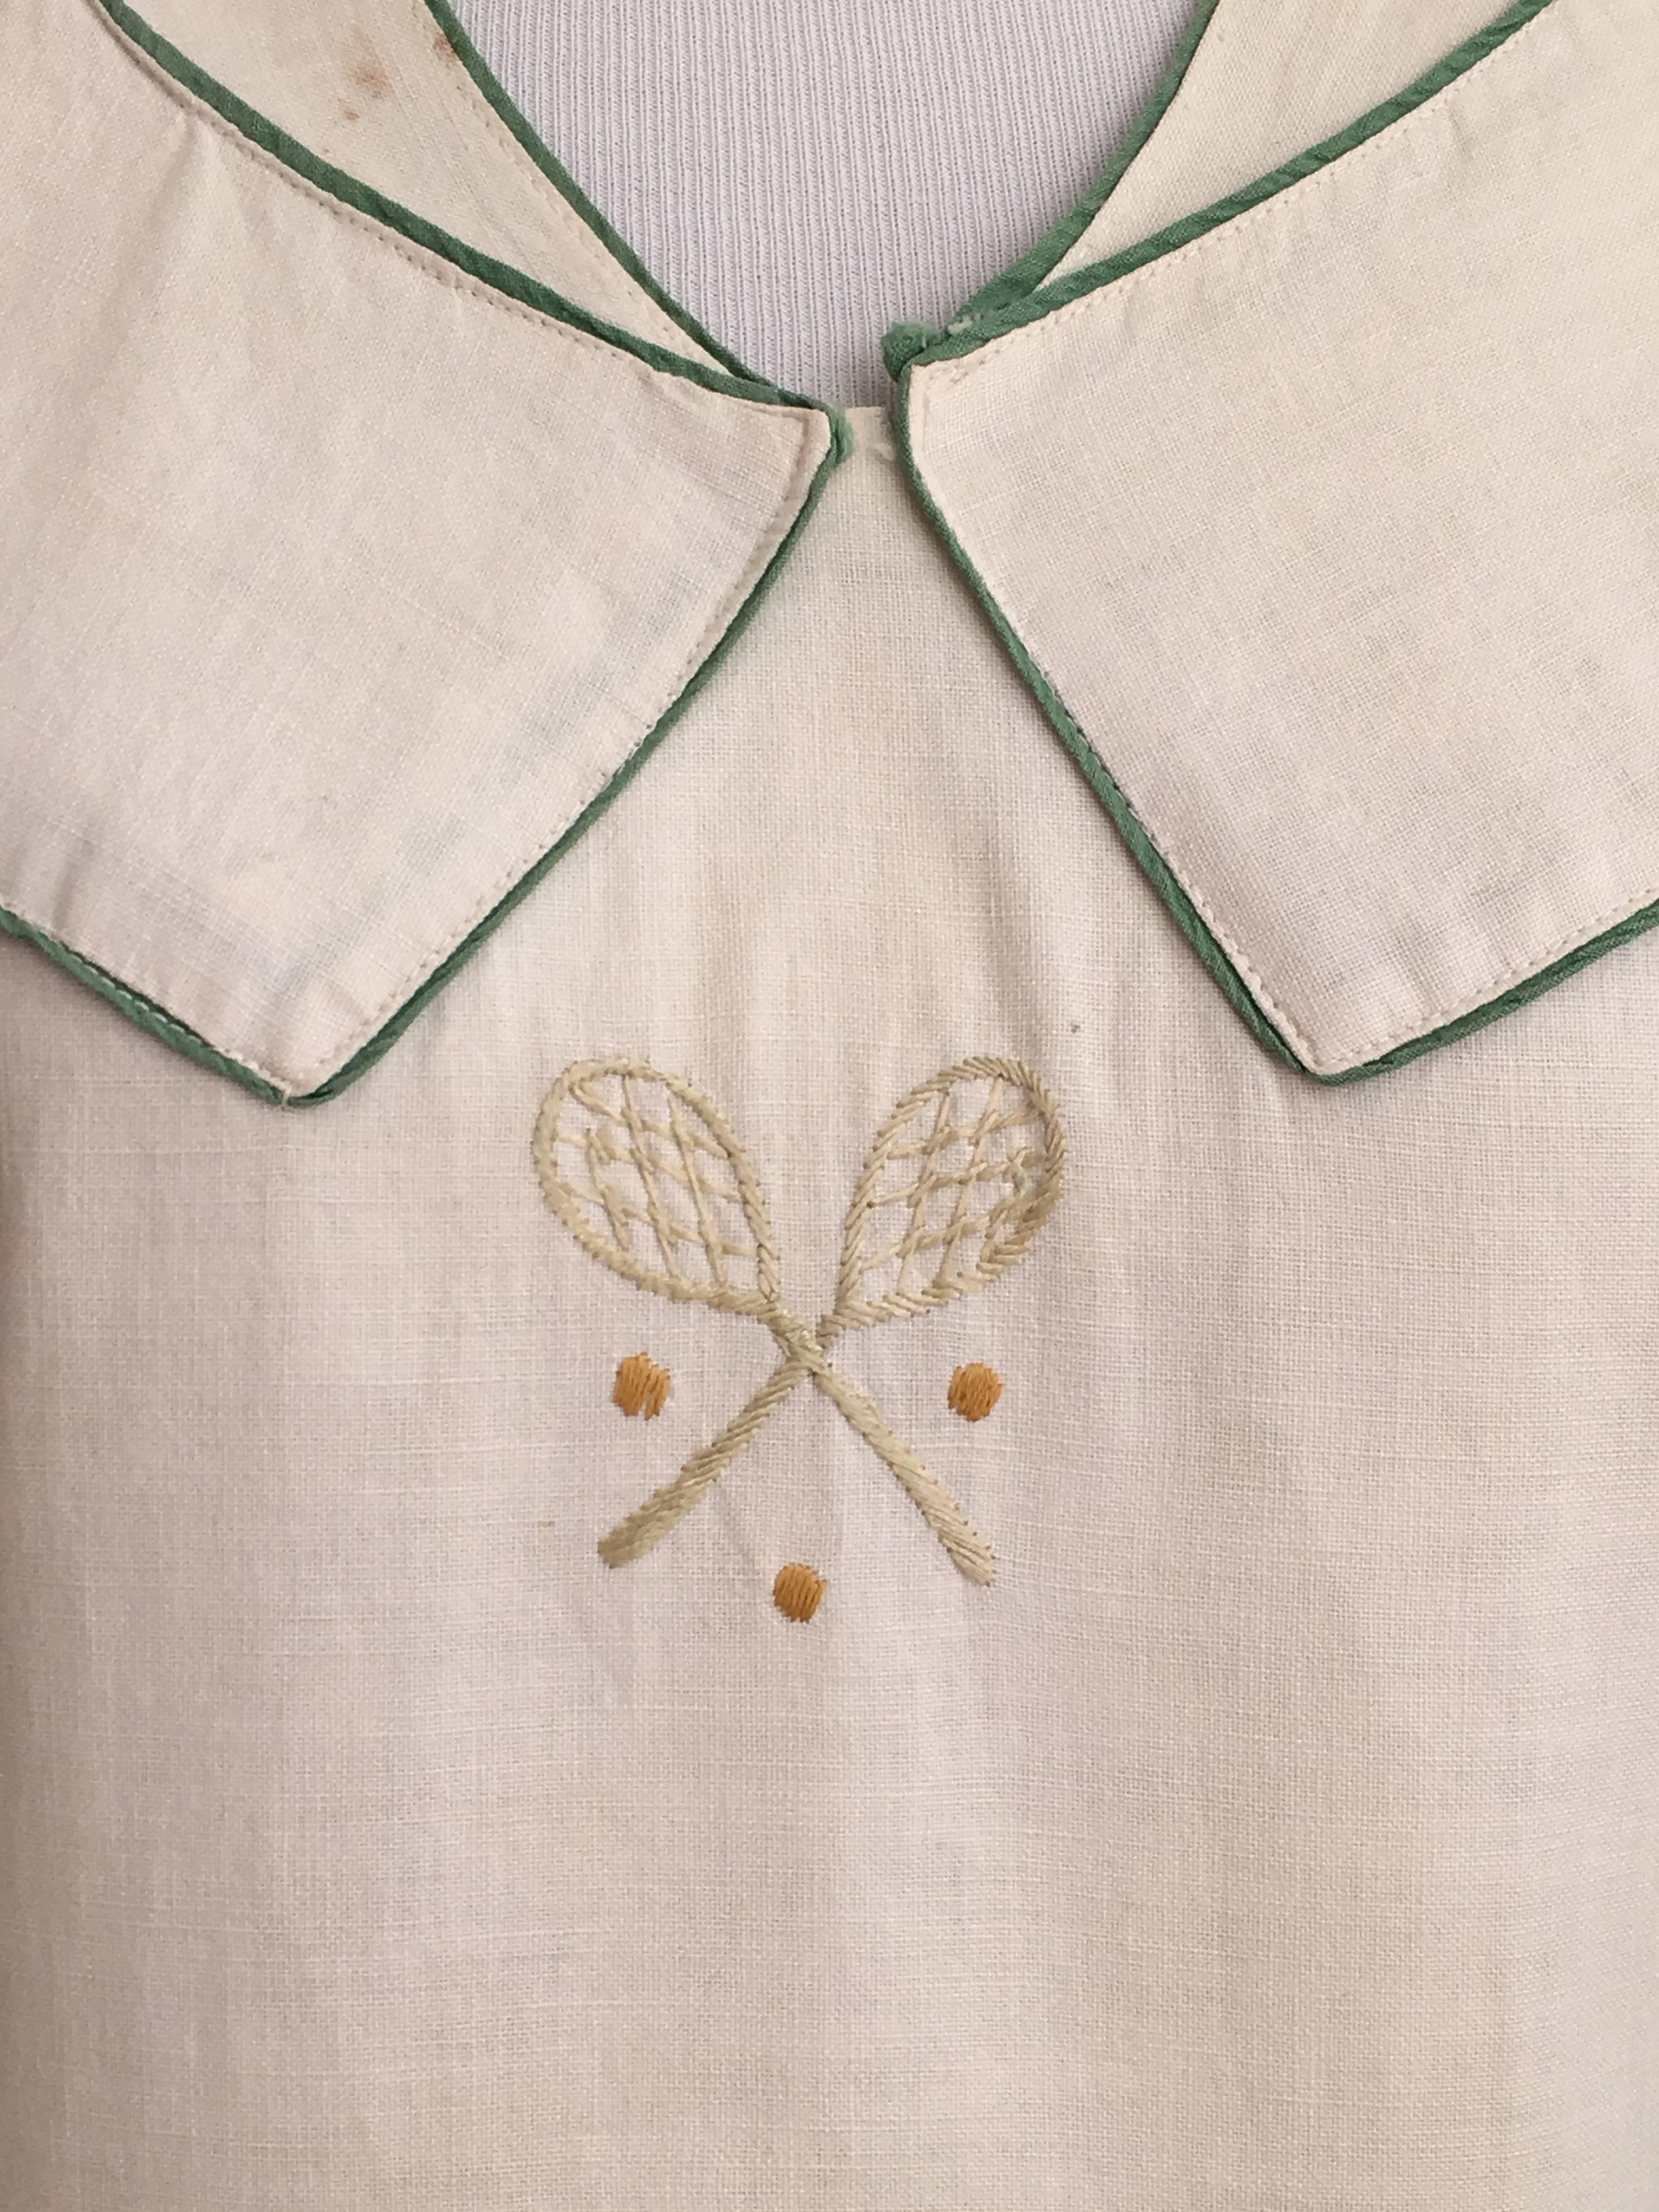 White Cotton Vintage Tennis Dress with Tennis Embroidery, 1920s   For Sale 1